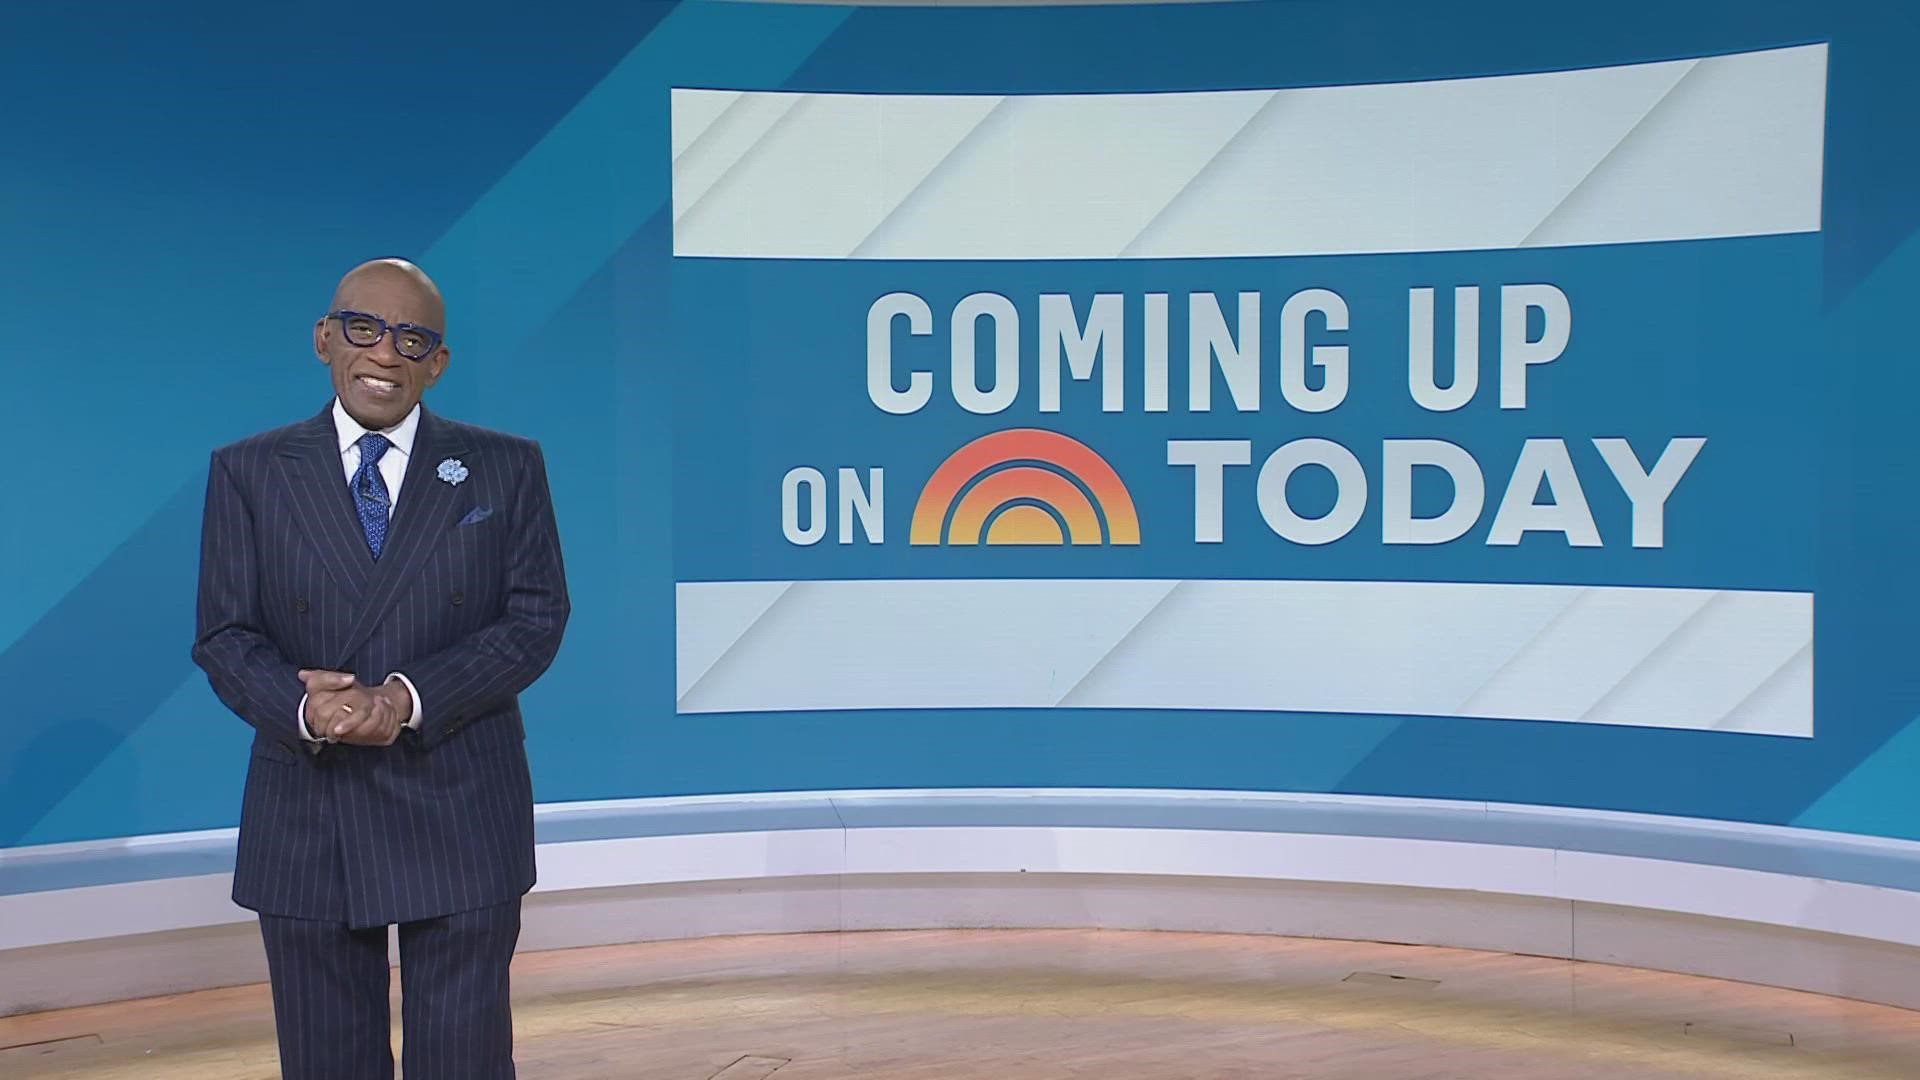 We are so thrilled to have our friend Al Roker back with us on the GO! morning show. It's his first appearance since dealing with health issues late last year.